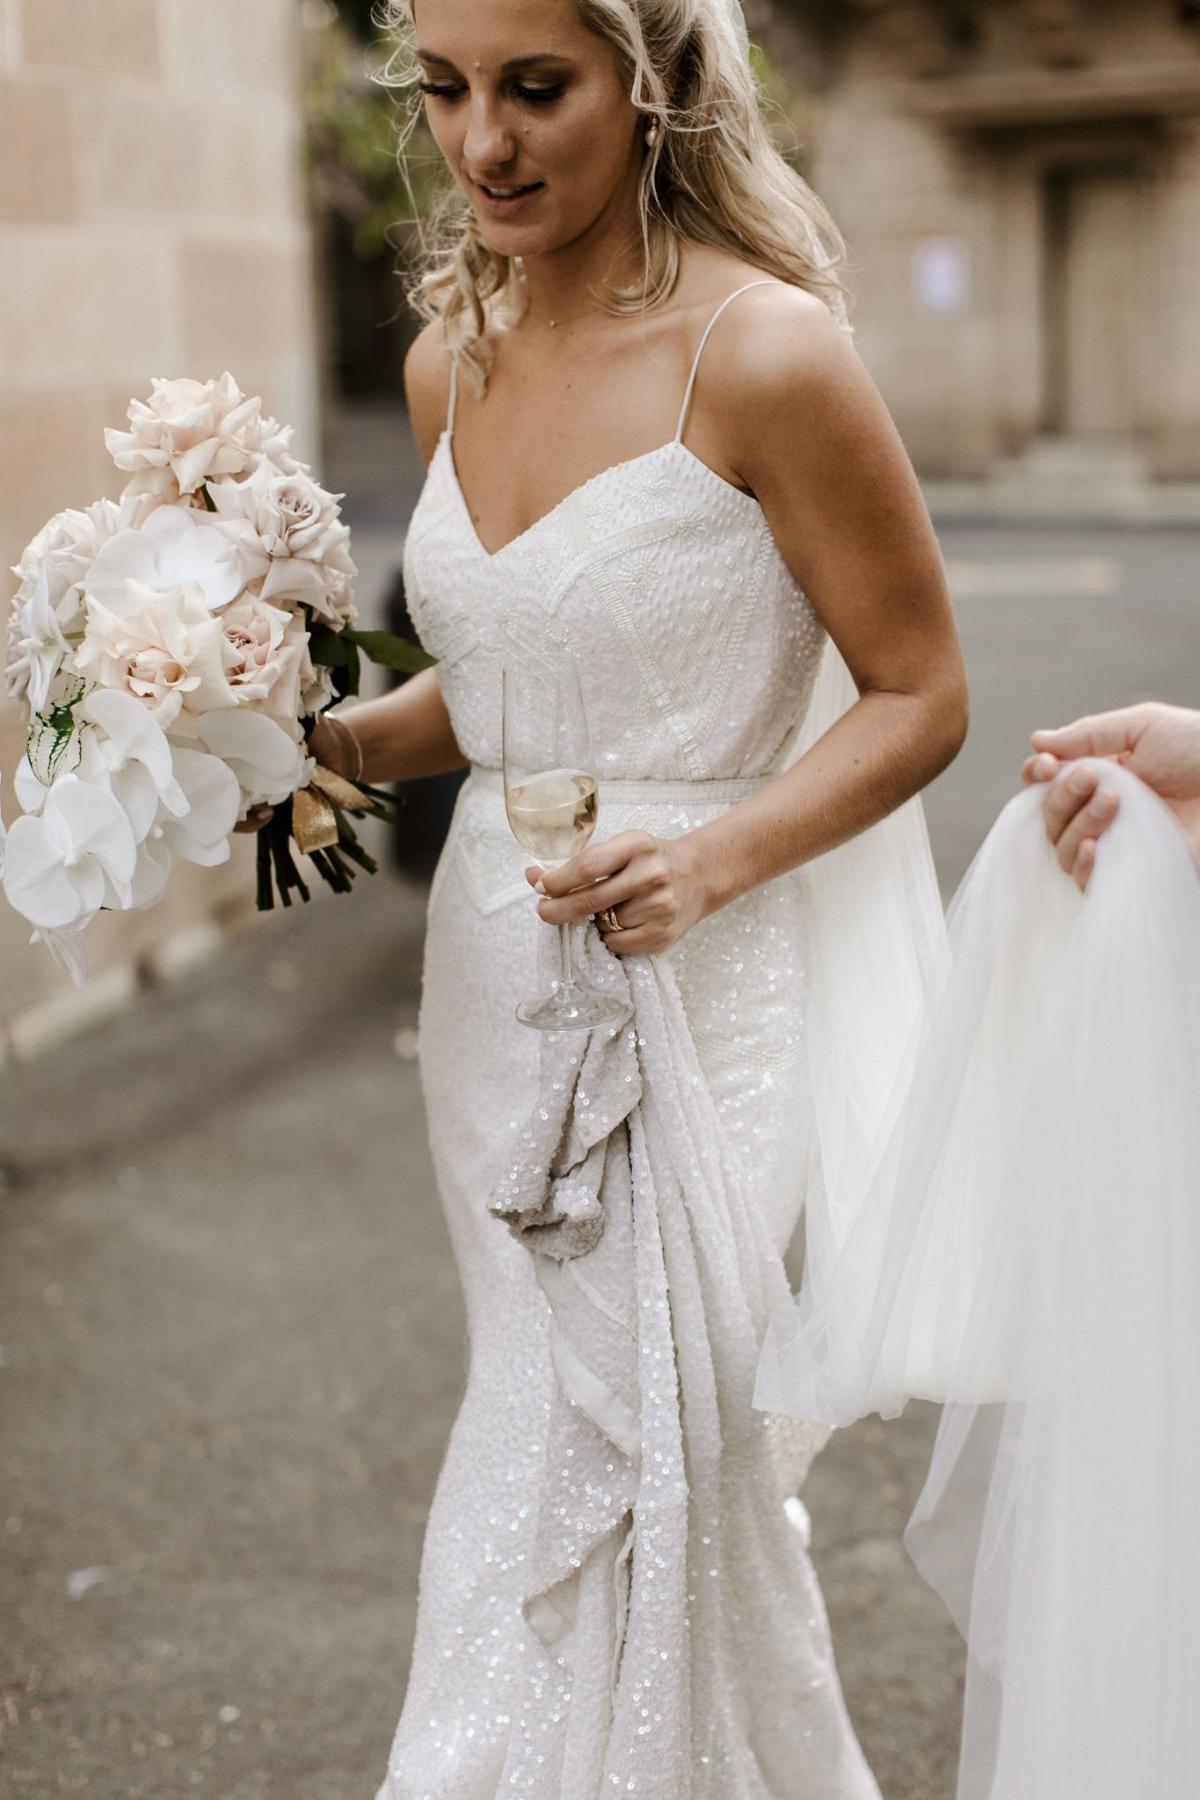 Read all about our real bride's wedding in this blog. She wore the Luxe Addison wedding dress by Karen Willis Holmes.